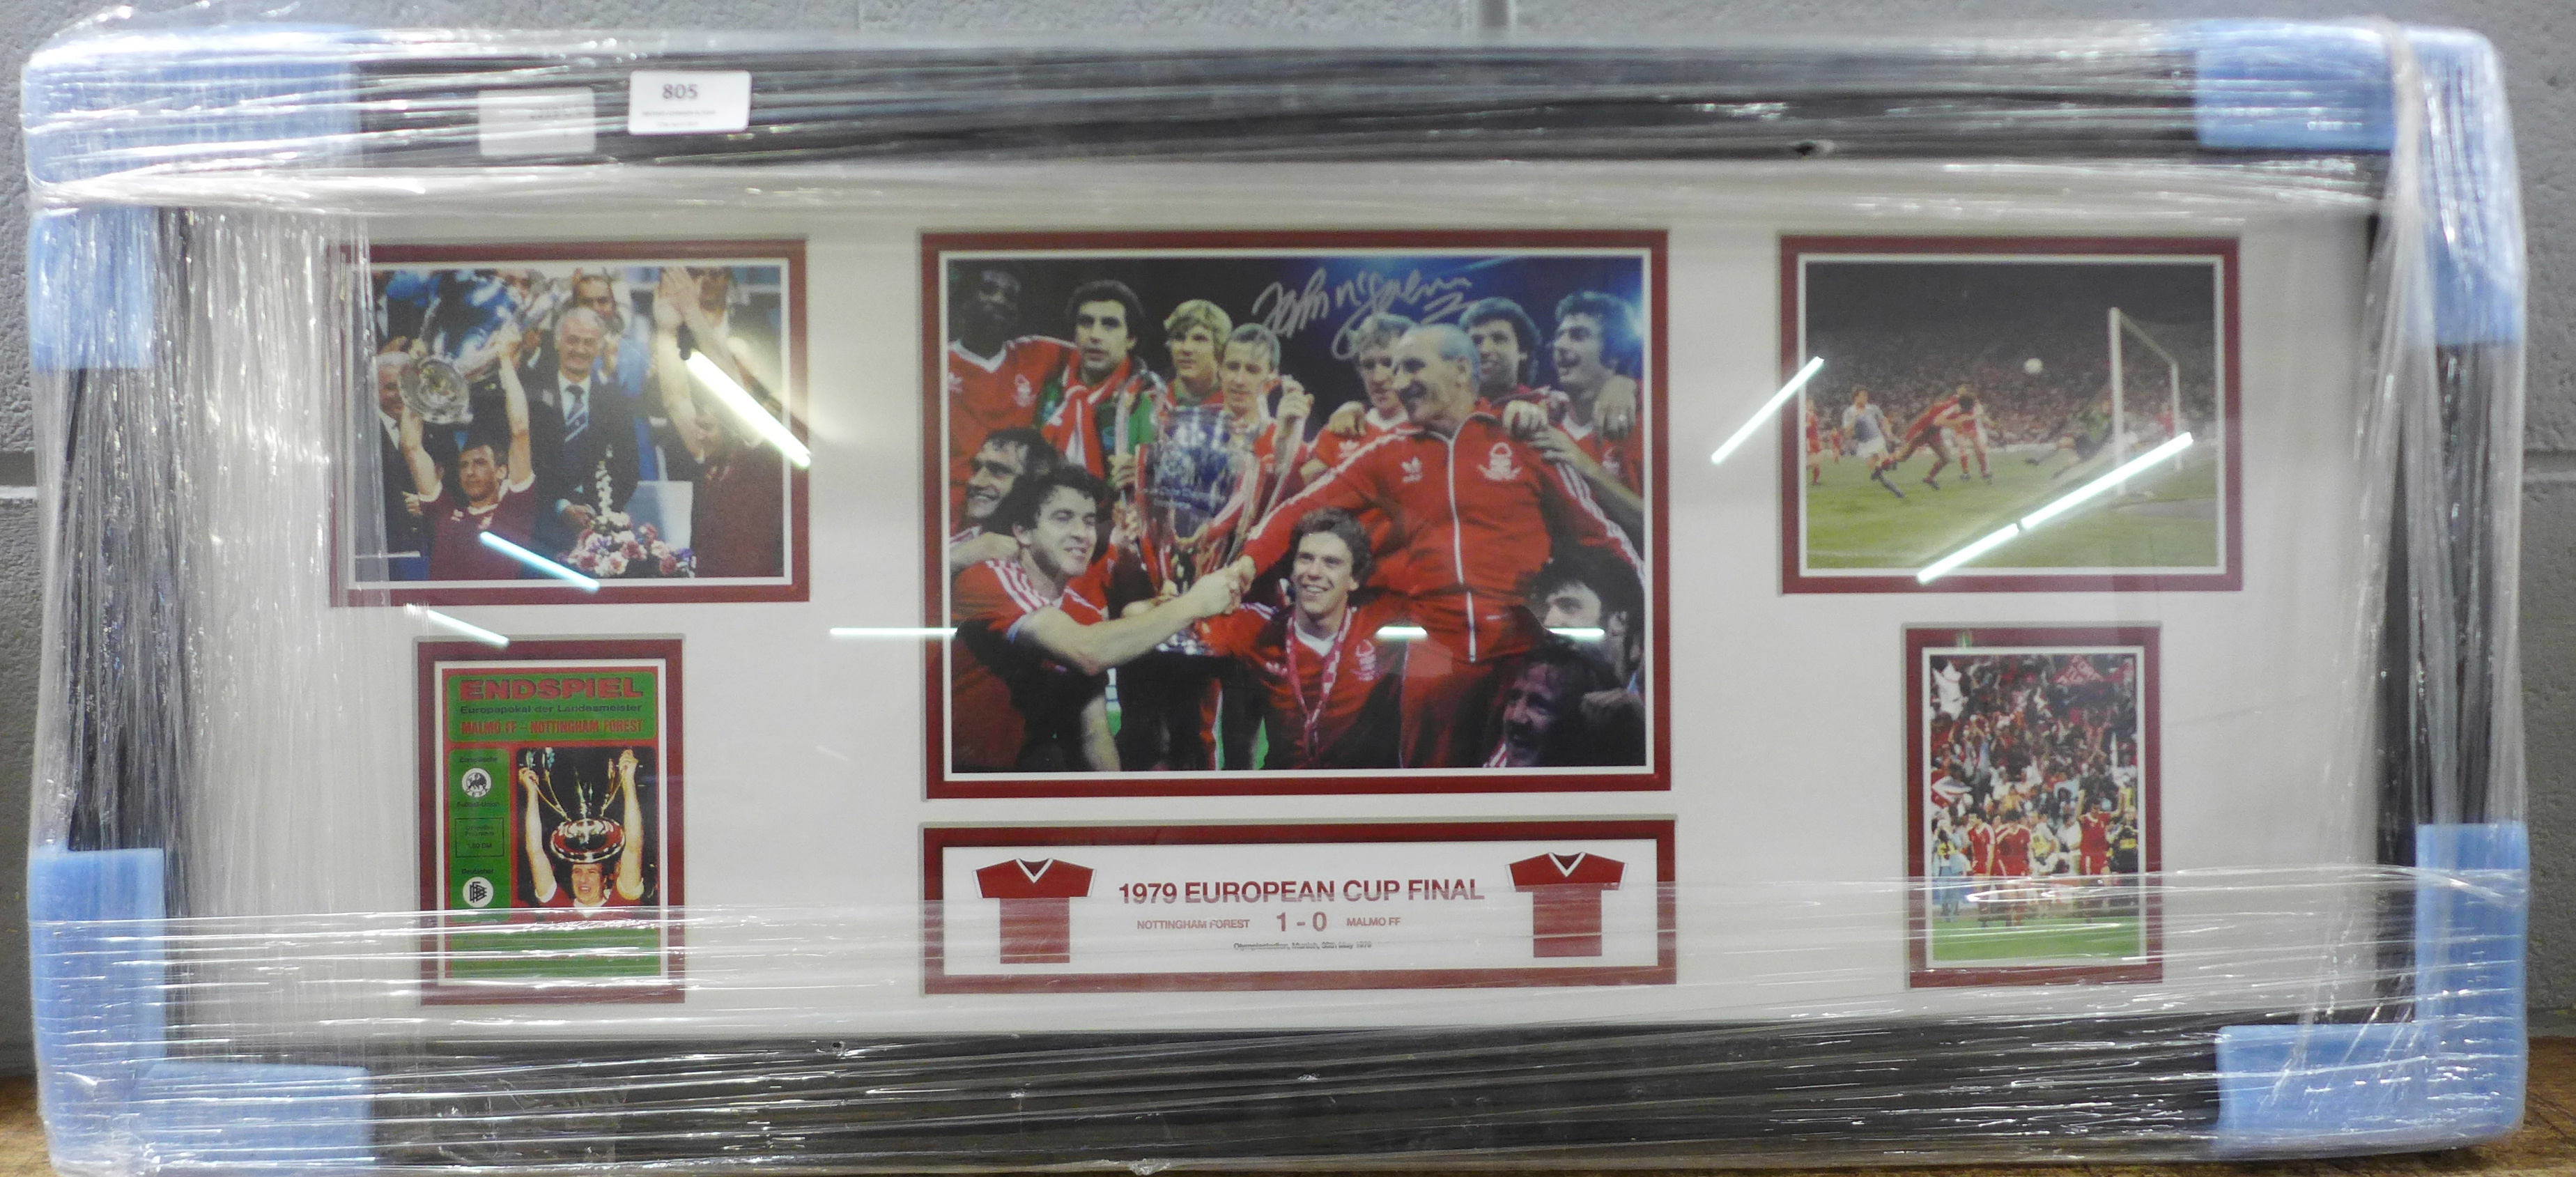 Nottingham Forest, framed and mounted pictures from the 1979 European Cup Final, one picture